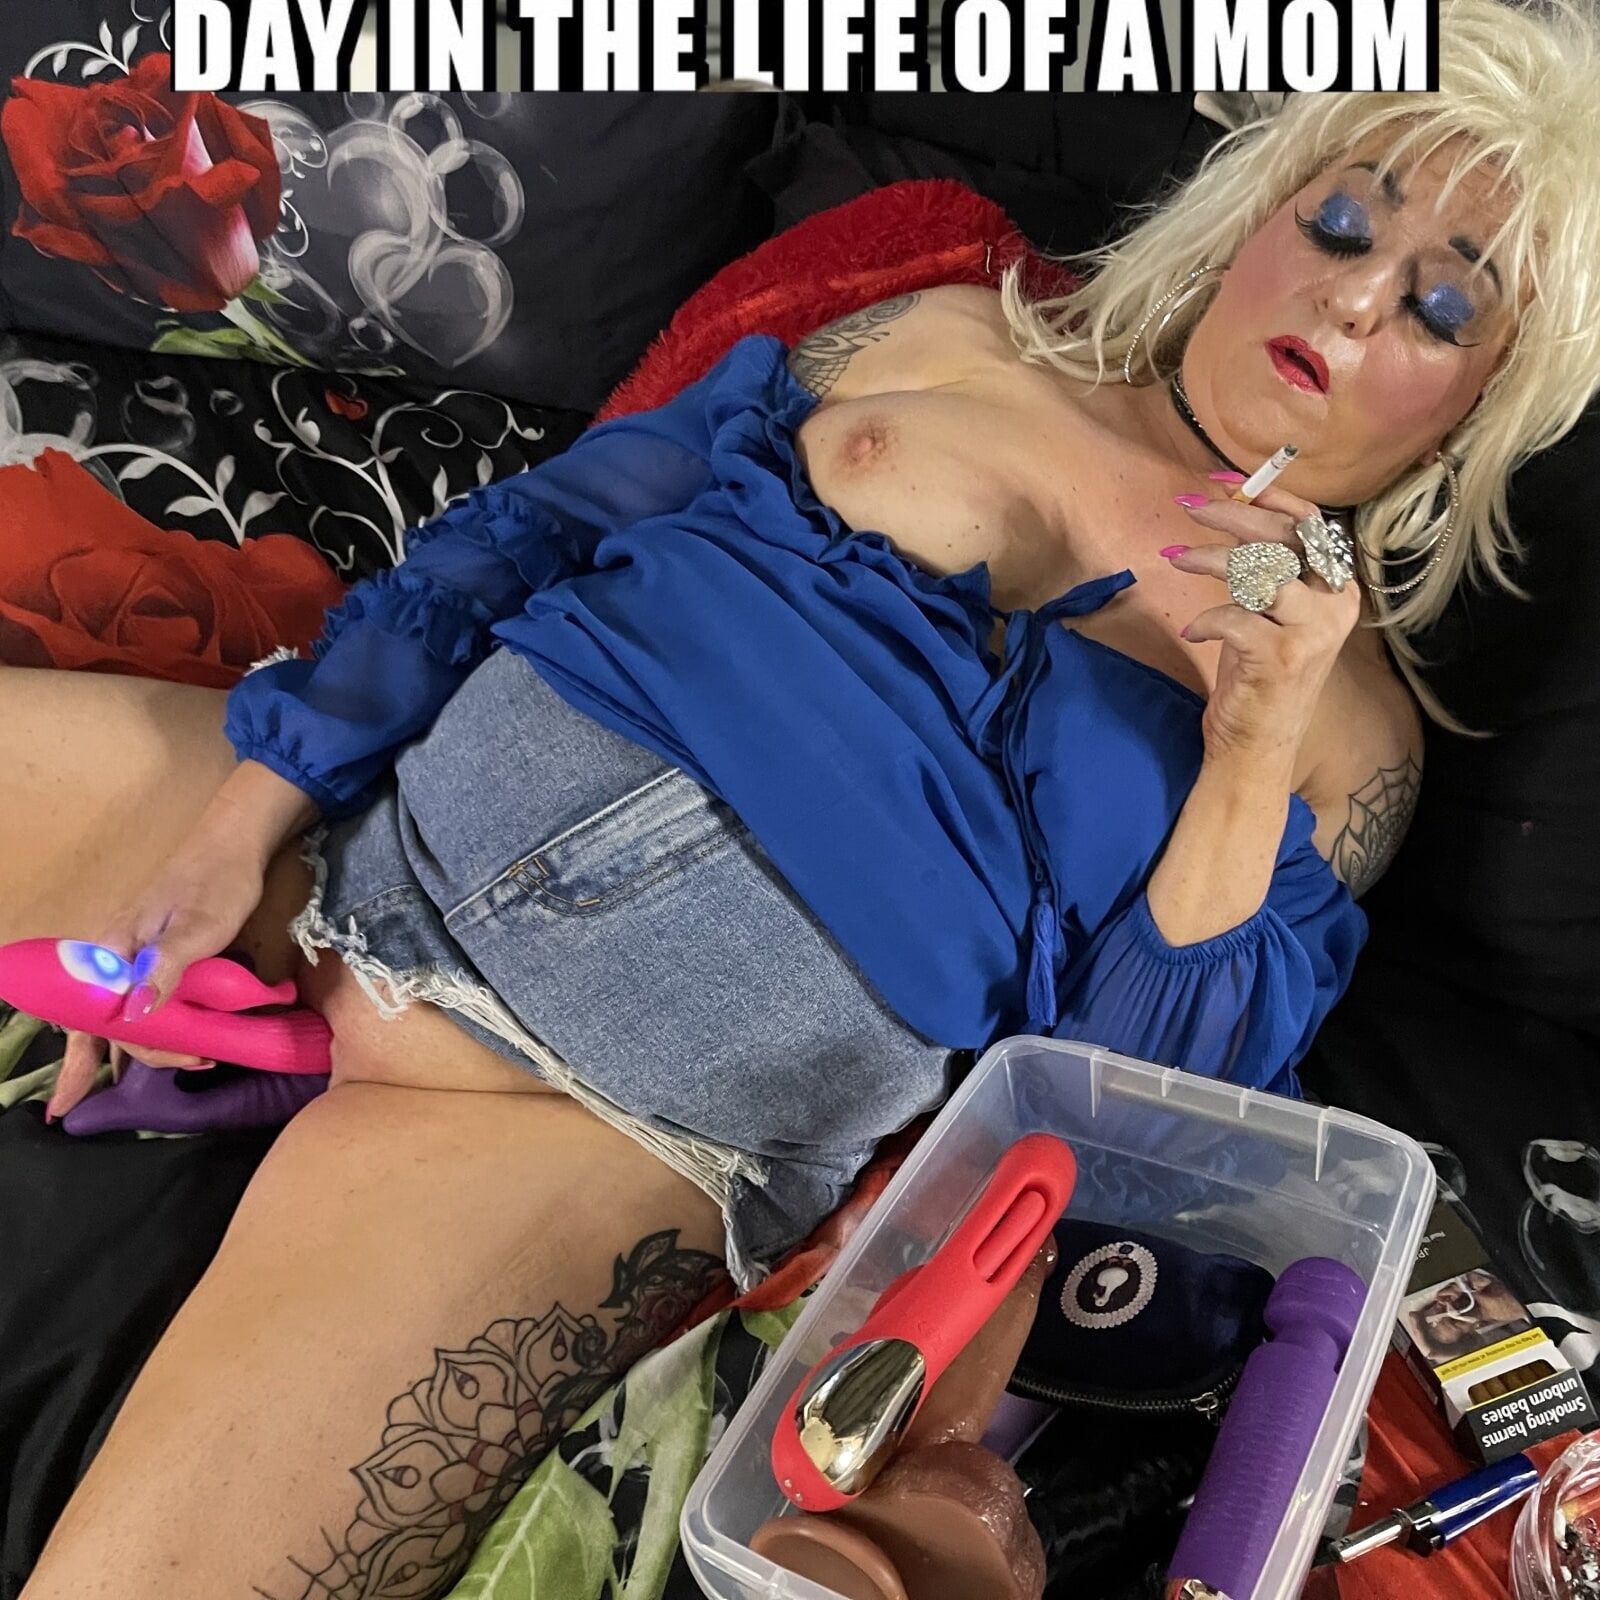 SHIRLEY THE LIFE OF A MOM #26